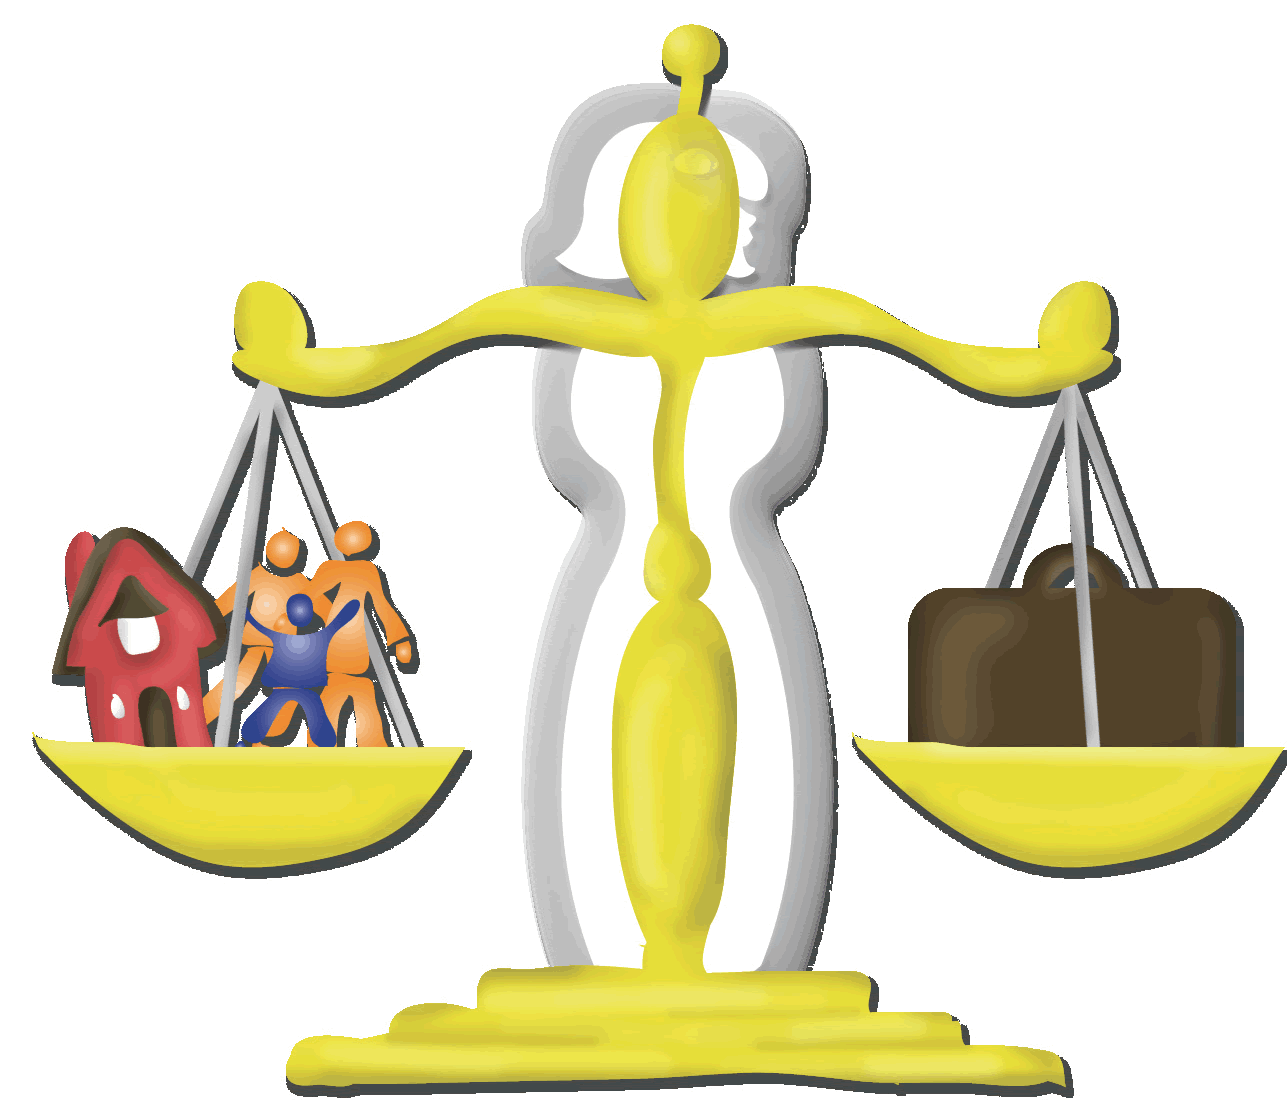 Legal terminology image of. Jury clipart court hearing